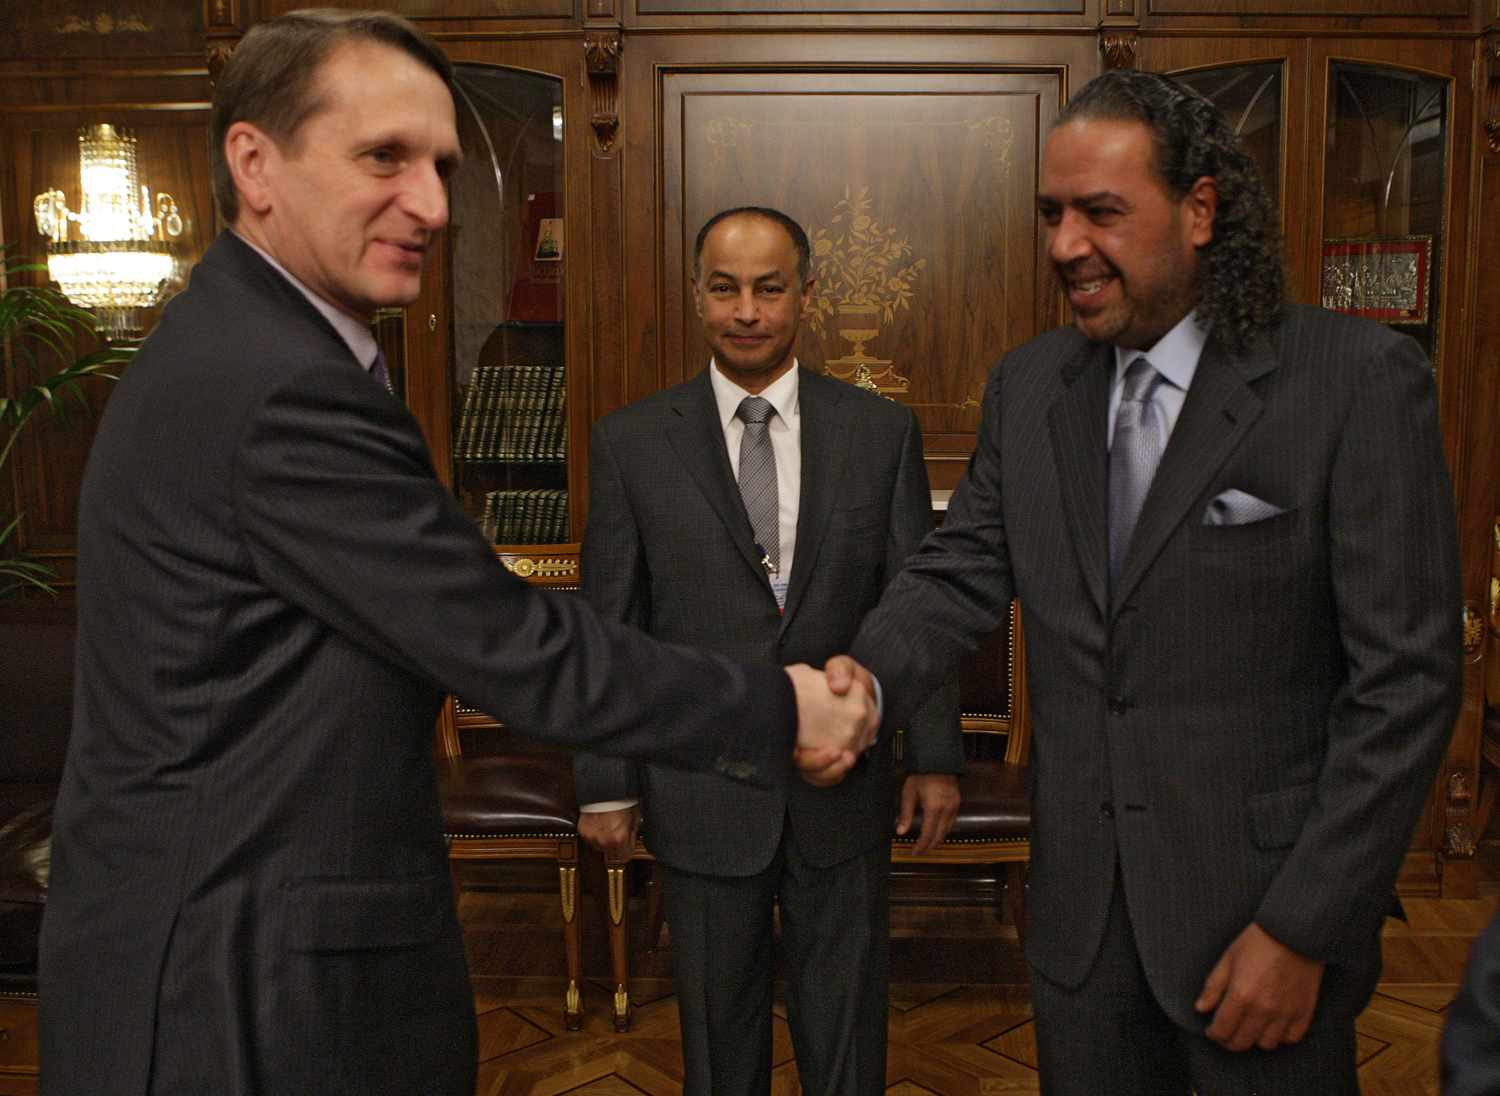 President of the Olympic Council of Asia (OCA) and President of the Association of the National Olympic Committees (ANOC) Sheikh Ahmad Al-Fahad AL-Sabah with Russia's Chairman of the State Duma Sergey Naryshkin